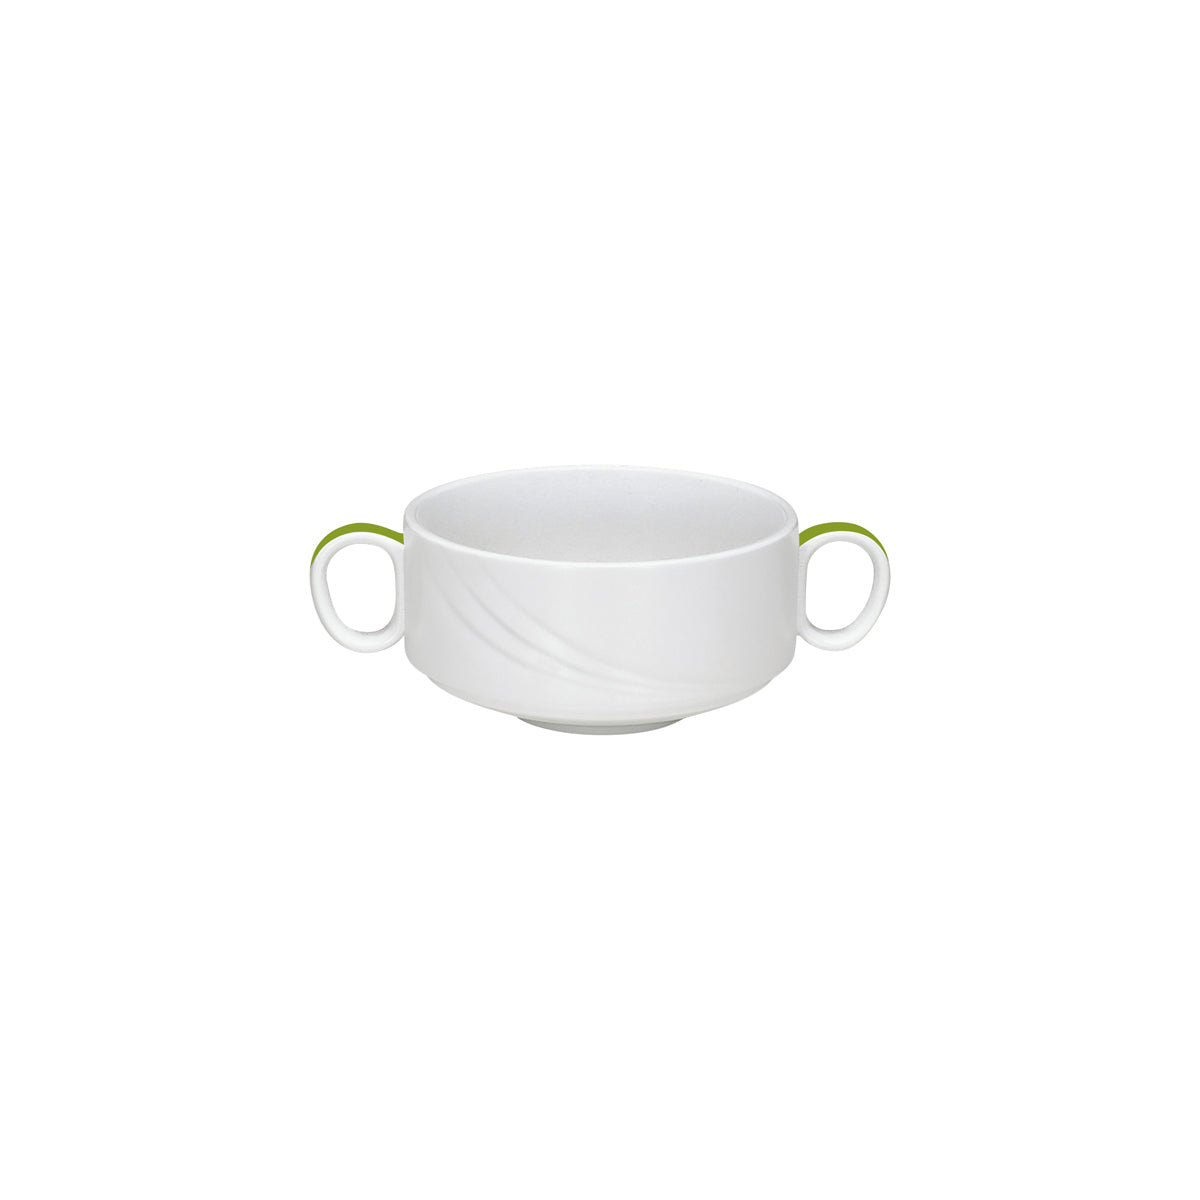 SH9182740/62941 Donna Senior Decor Stackable Soup Cup with 2 Handles with Light Green Band 108x66mm / 480ml Tomkin Australia Hospitality Supplies